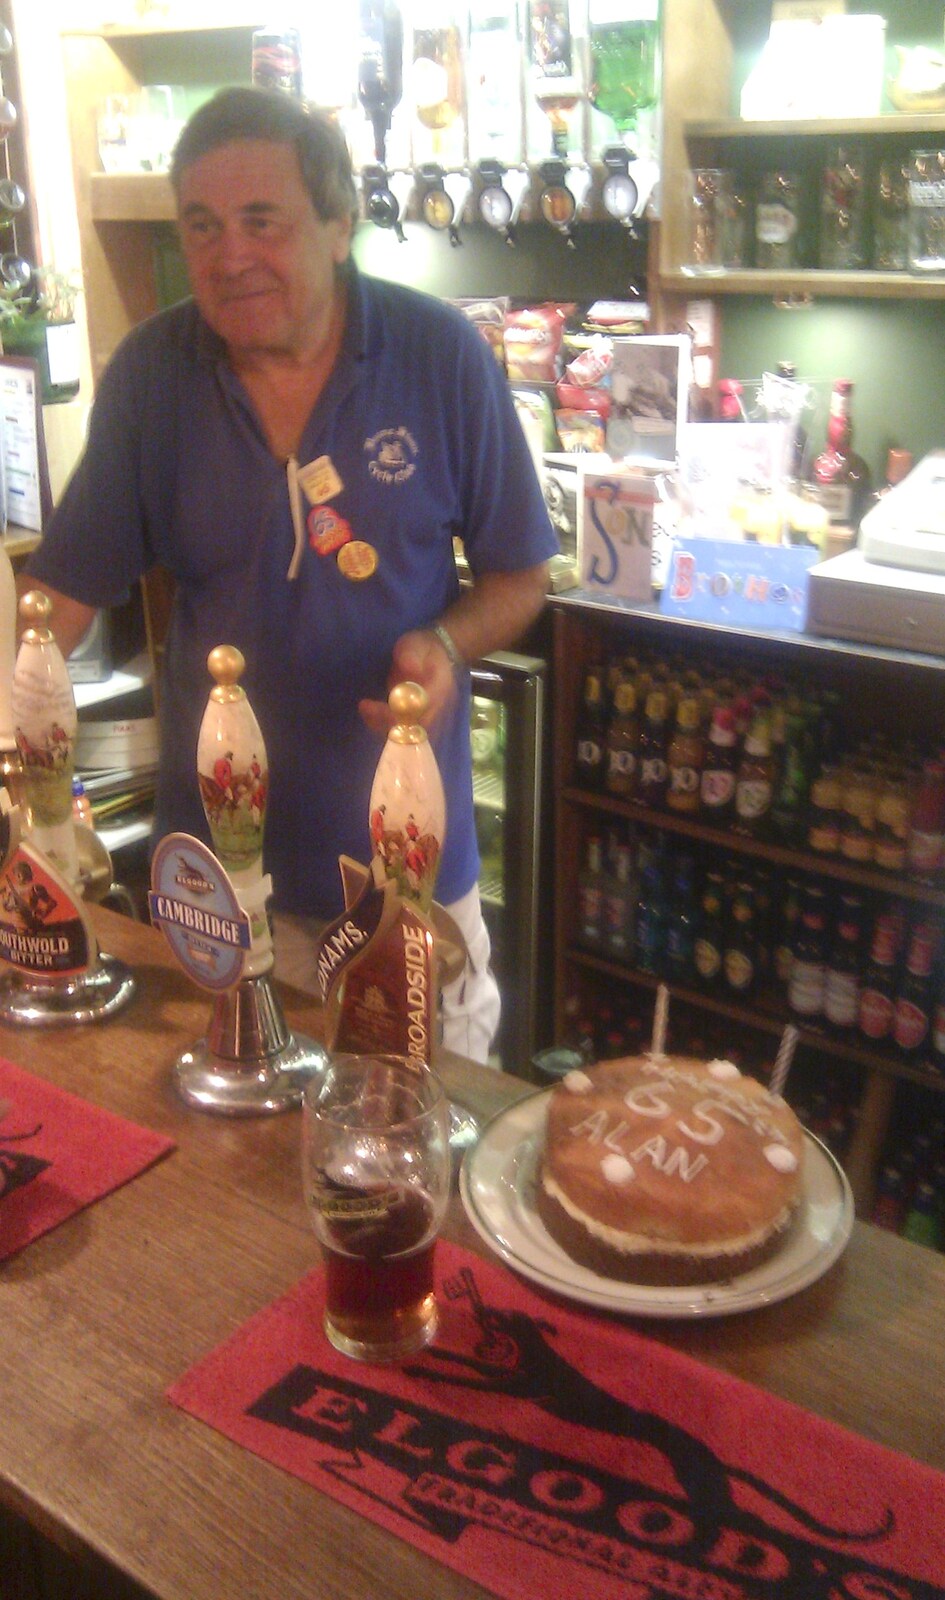 Alan behind the bar from Barbeque at the Swan Inn, Brome, Suffolk - 5th August 2011